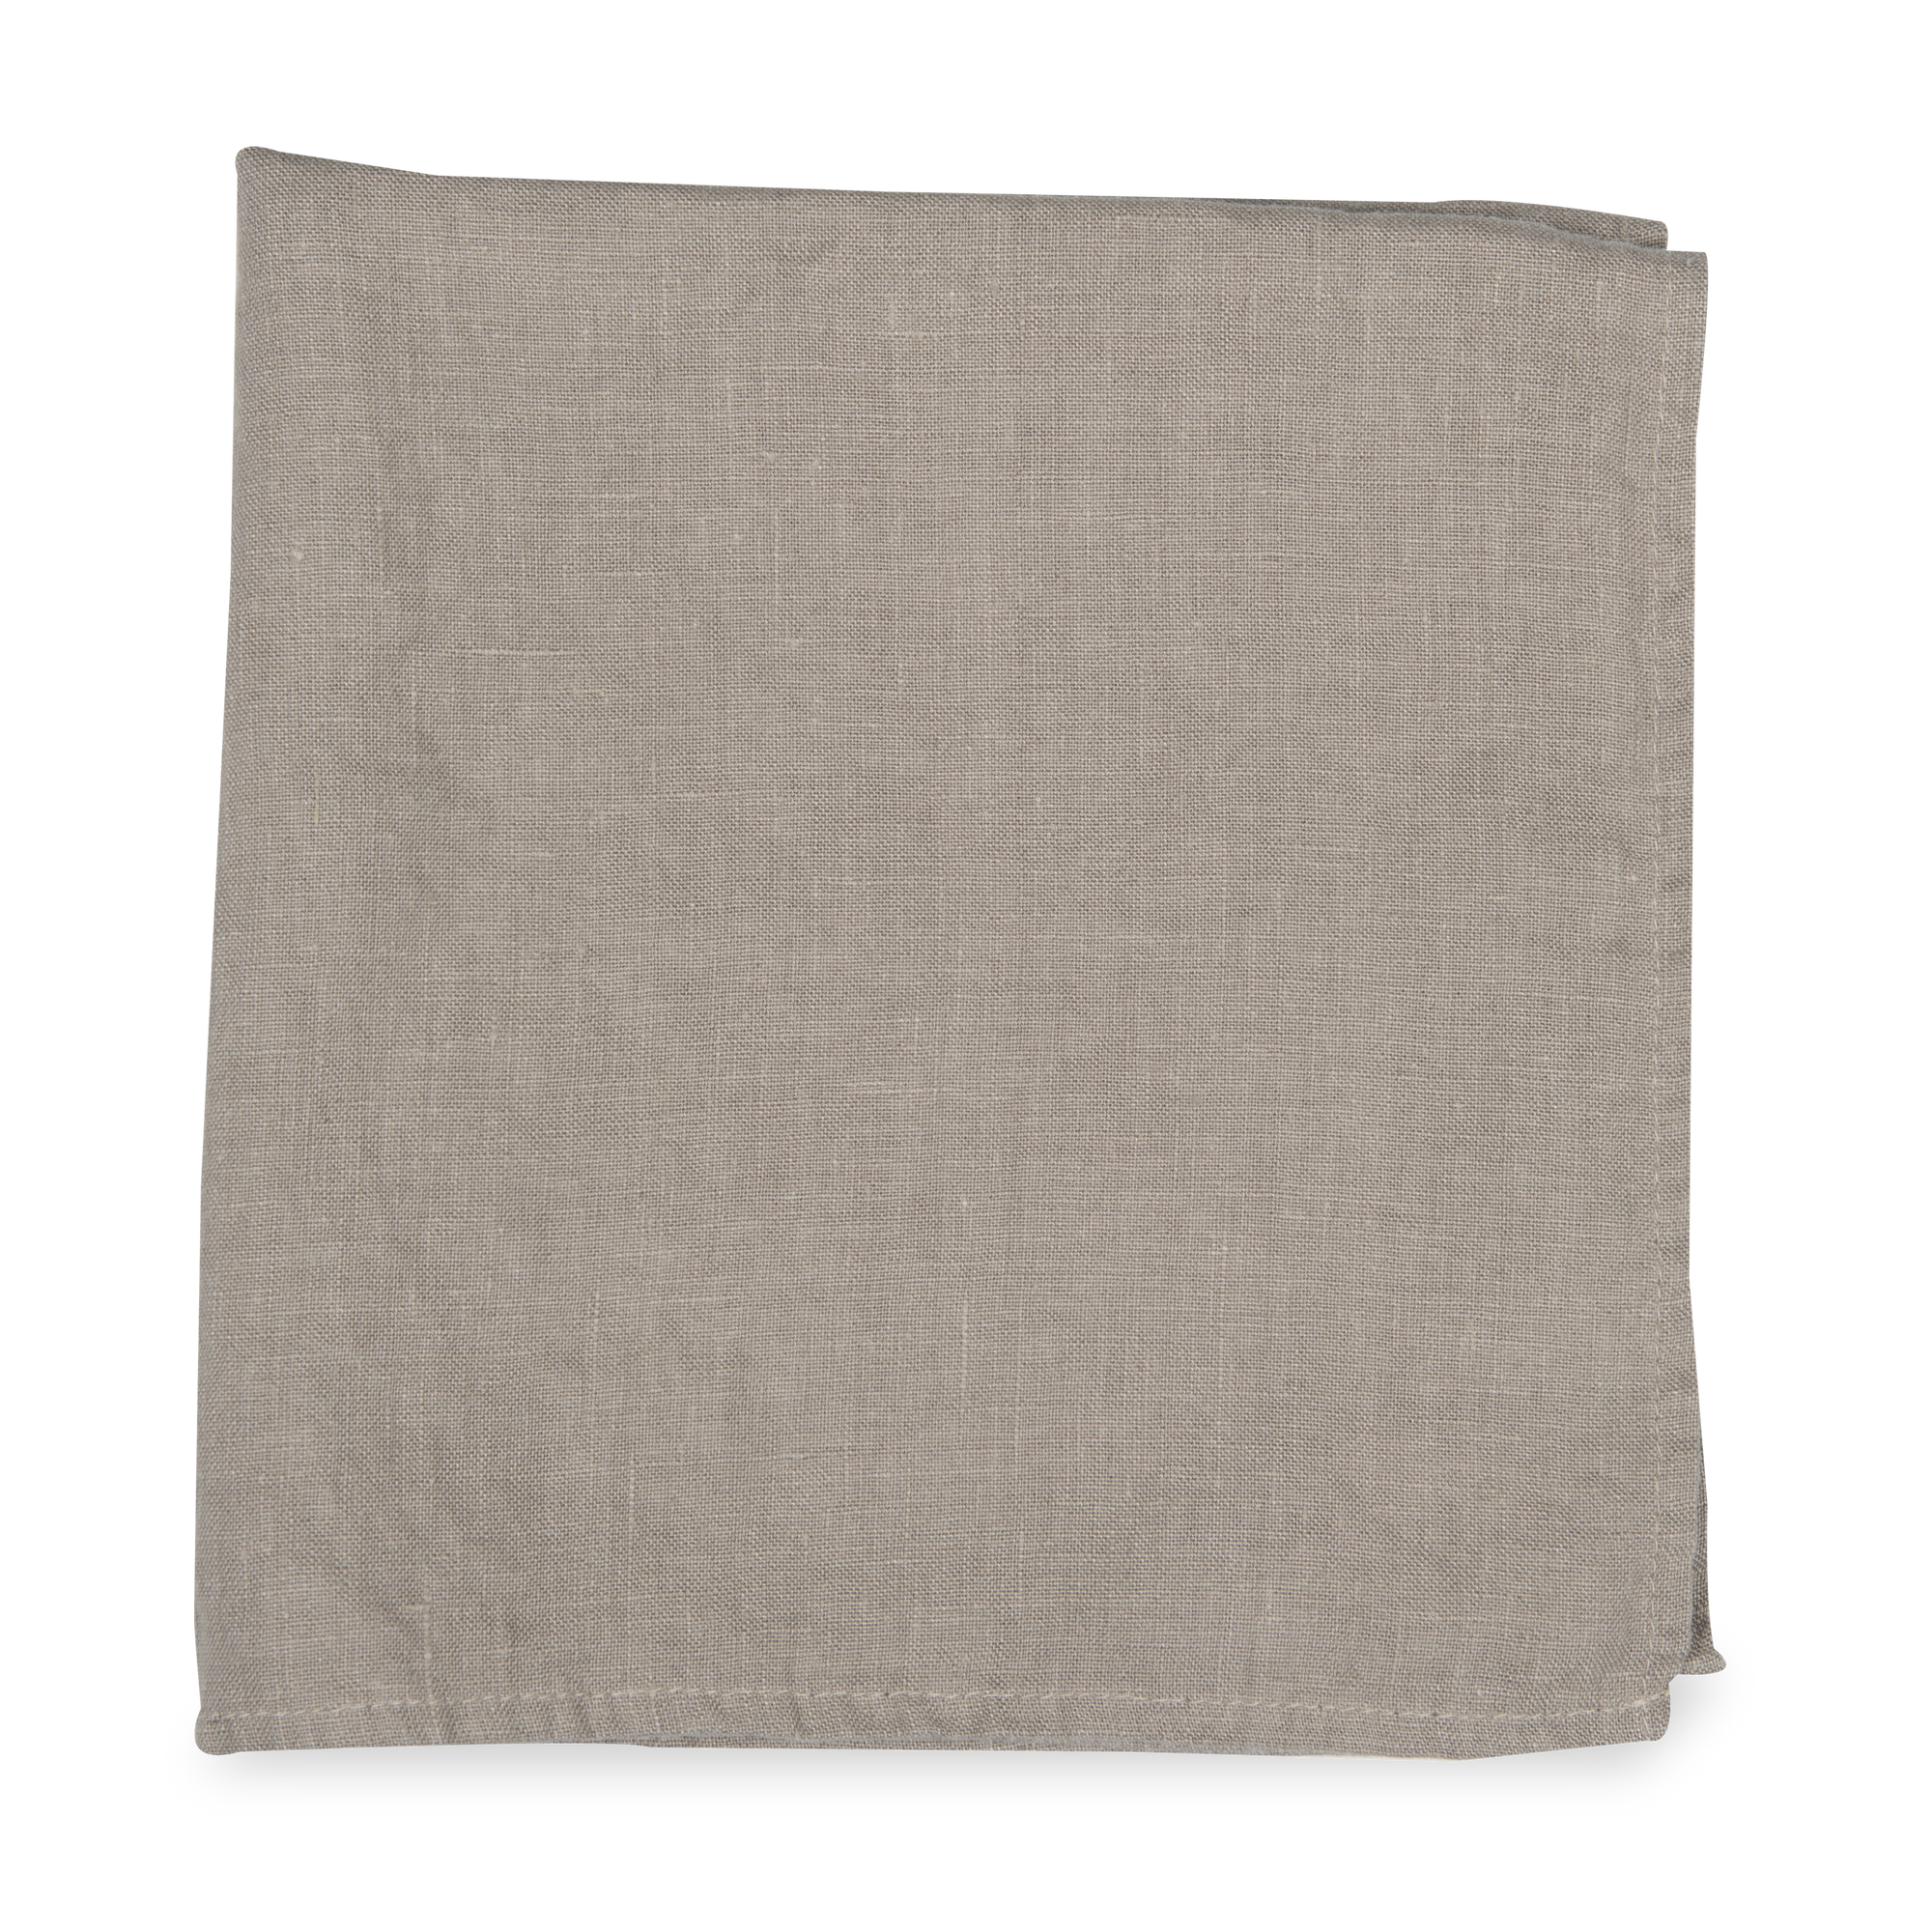 The Washed Linen Napkin feature relaxed linen that is stonewashed for softness and a casually crinkled finish.